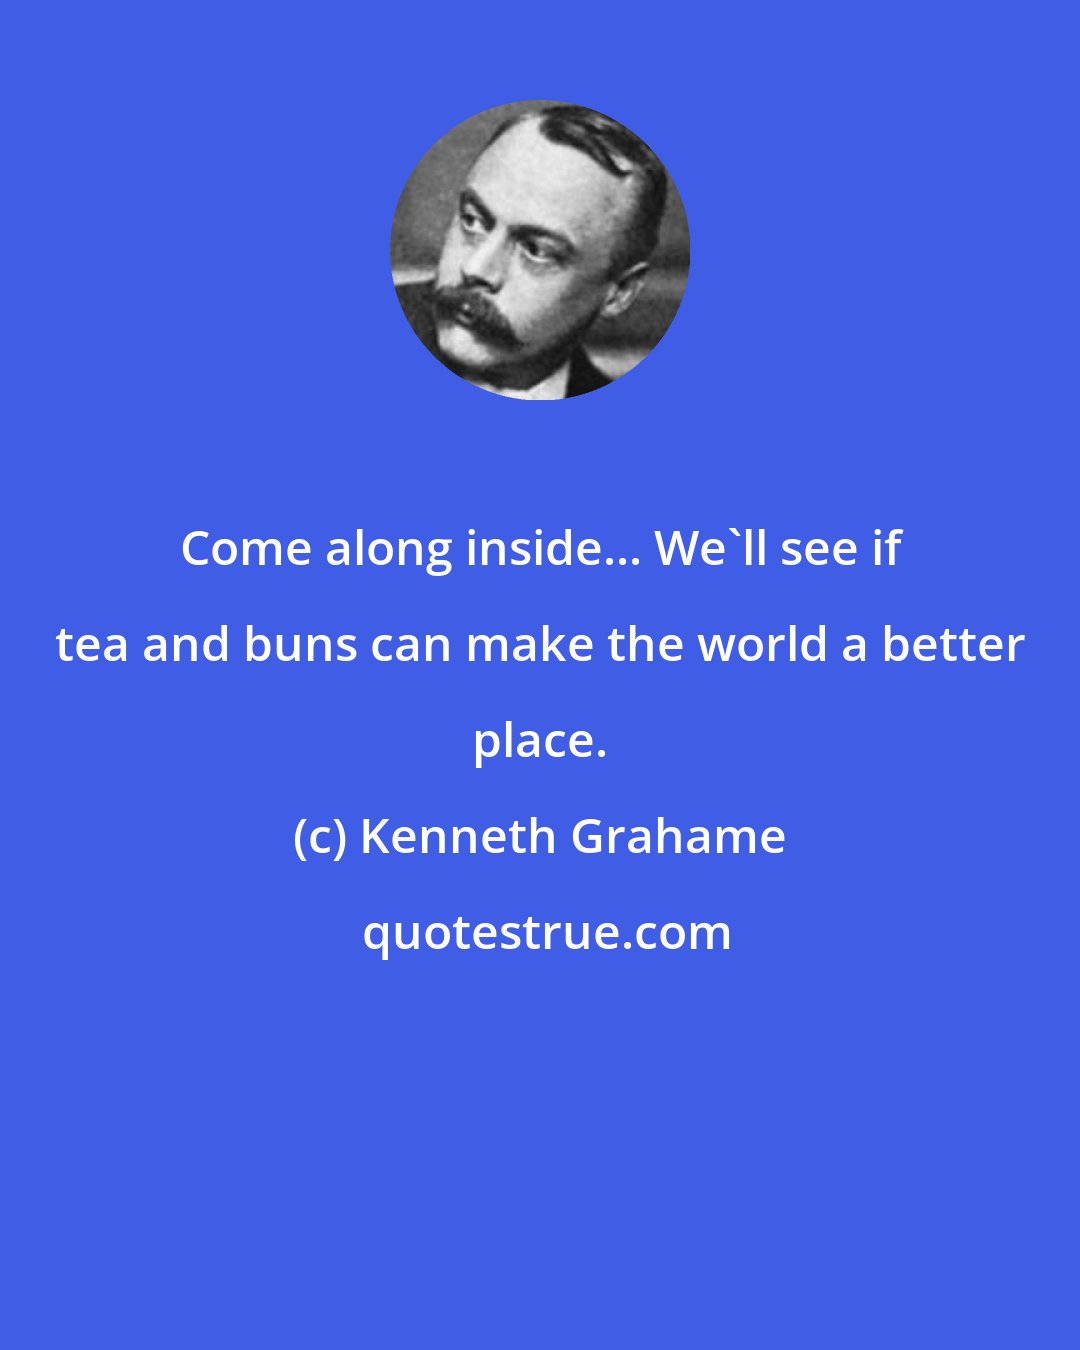 Kenneth Grahame: Come along inside... We'll see if tea and buns can make the world a better place.